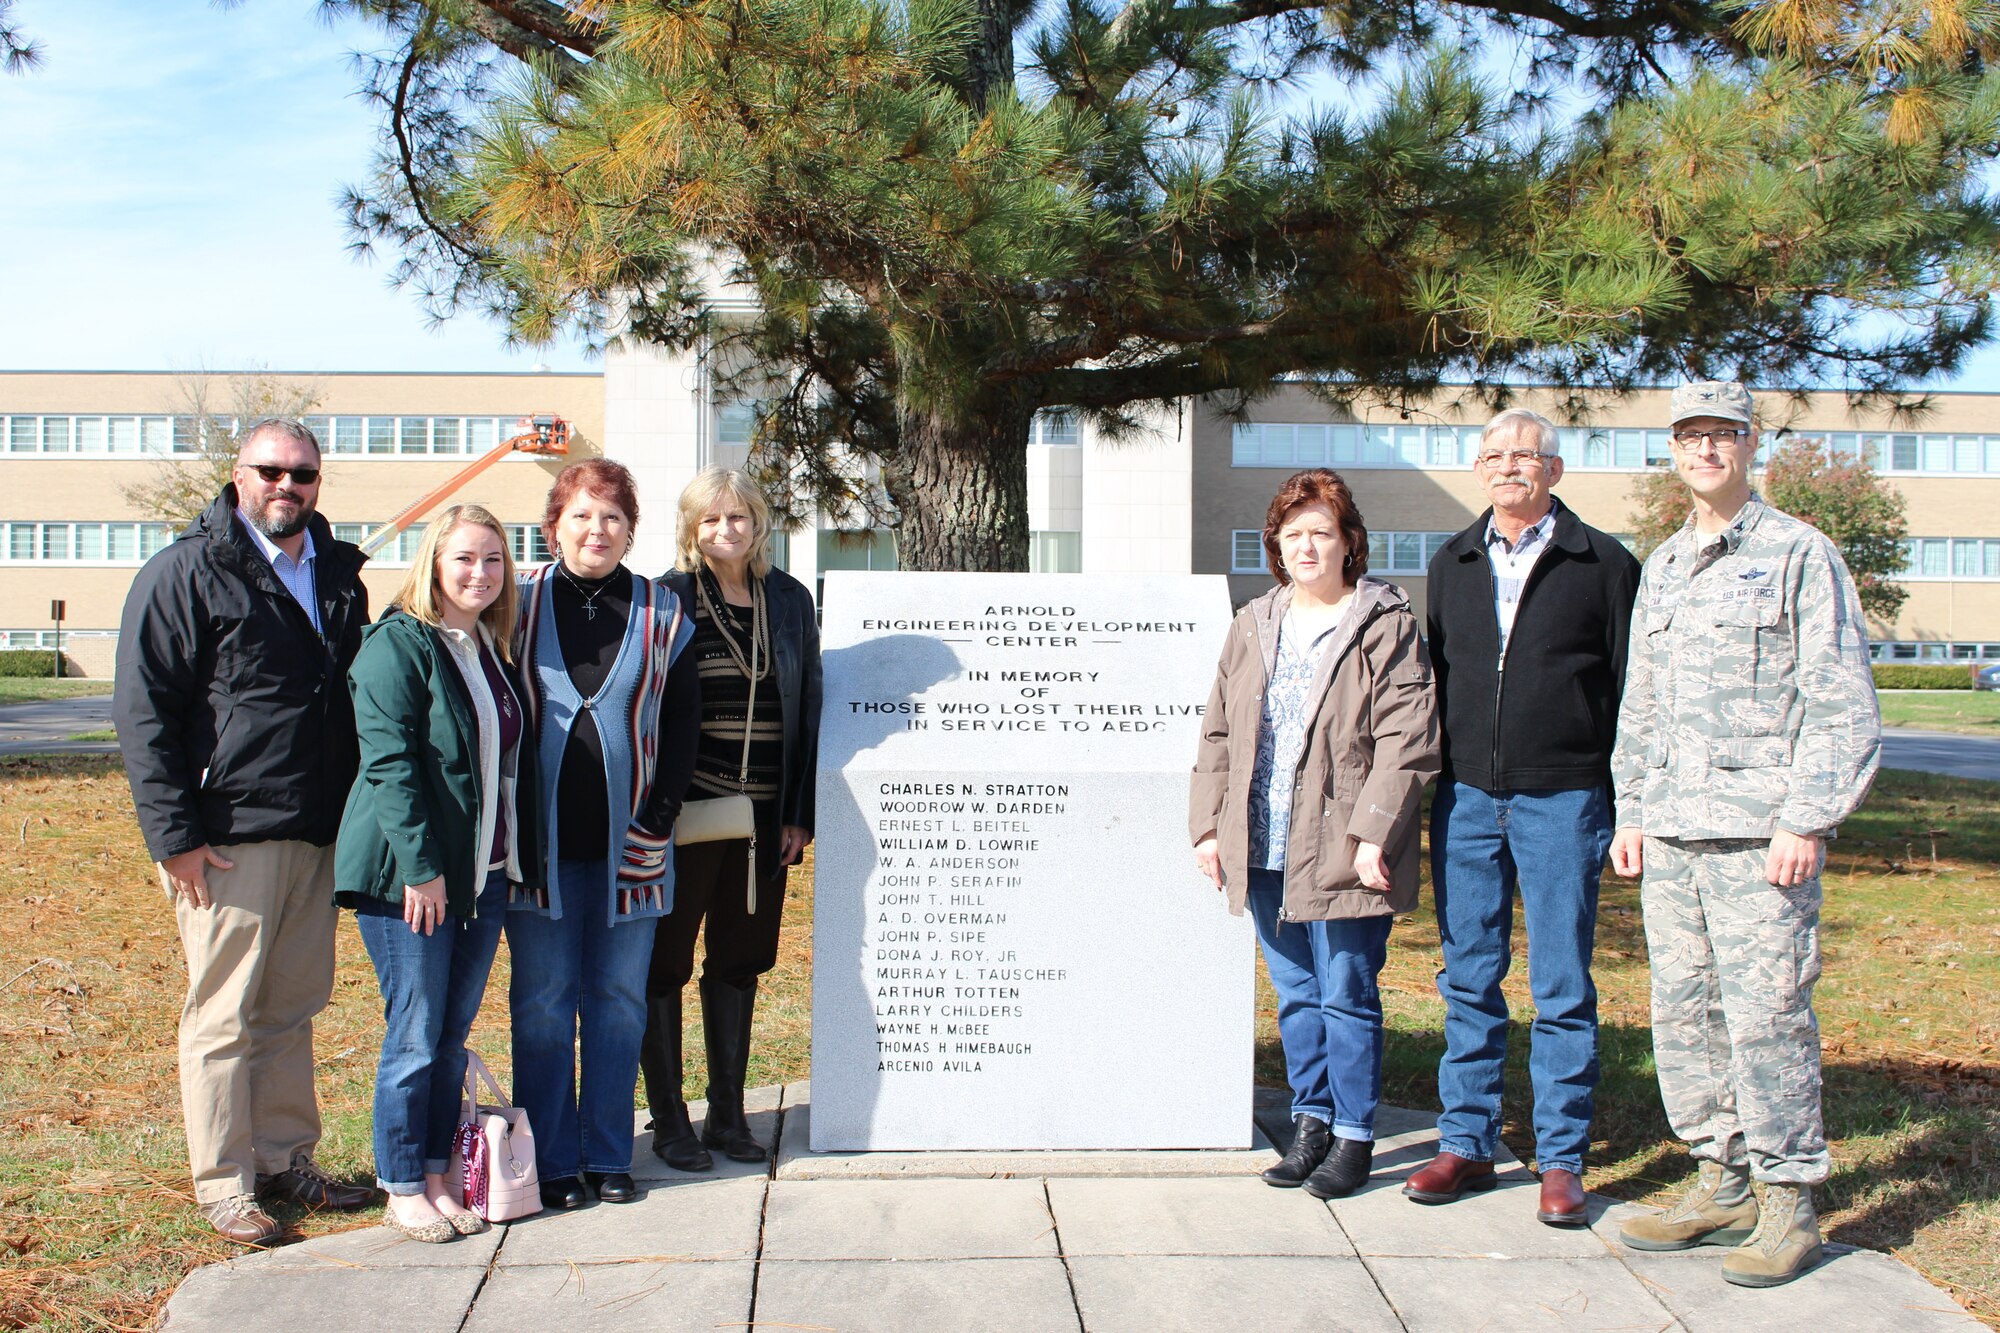 The family of the late Wilmer Adam Anderson, an AEDC concrete laborer, visited Arnold Air Force Base on Nov. 16 to see the memorial outside the Administration and Engineering Building that is dedicated to individuals who have lost their lives in service to AEDC. Anderson was among four AEDC team members who tragically lost their lives in an accident Dec. 17, 1962, at the J-4 liquid rocket test cell. Pictured left to right: Chris Warner, operations chief of AEDC Public Affairs; Julie Gesell; Bridgette Boner; Melissa Gesell; Marilyn Anderson Morton; Danny Anderson; and AEDC Commander Col. Cain. (U.S. Air Force photo by Deidre Ortiz)